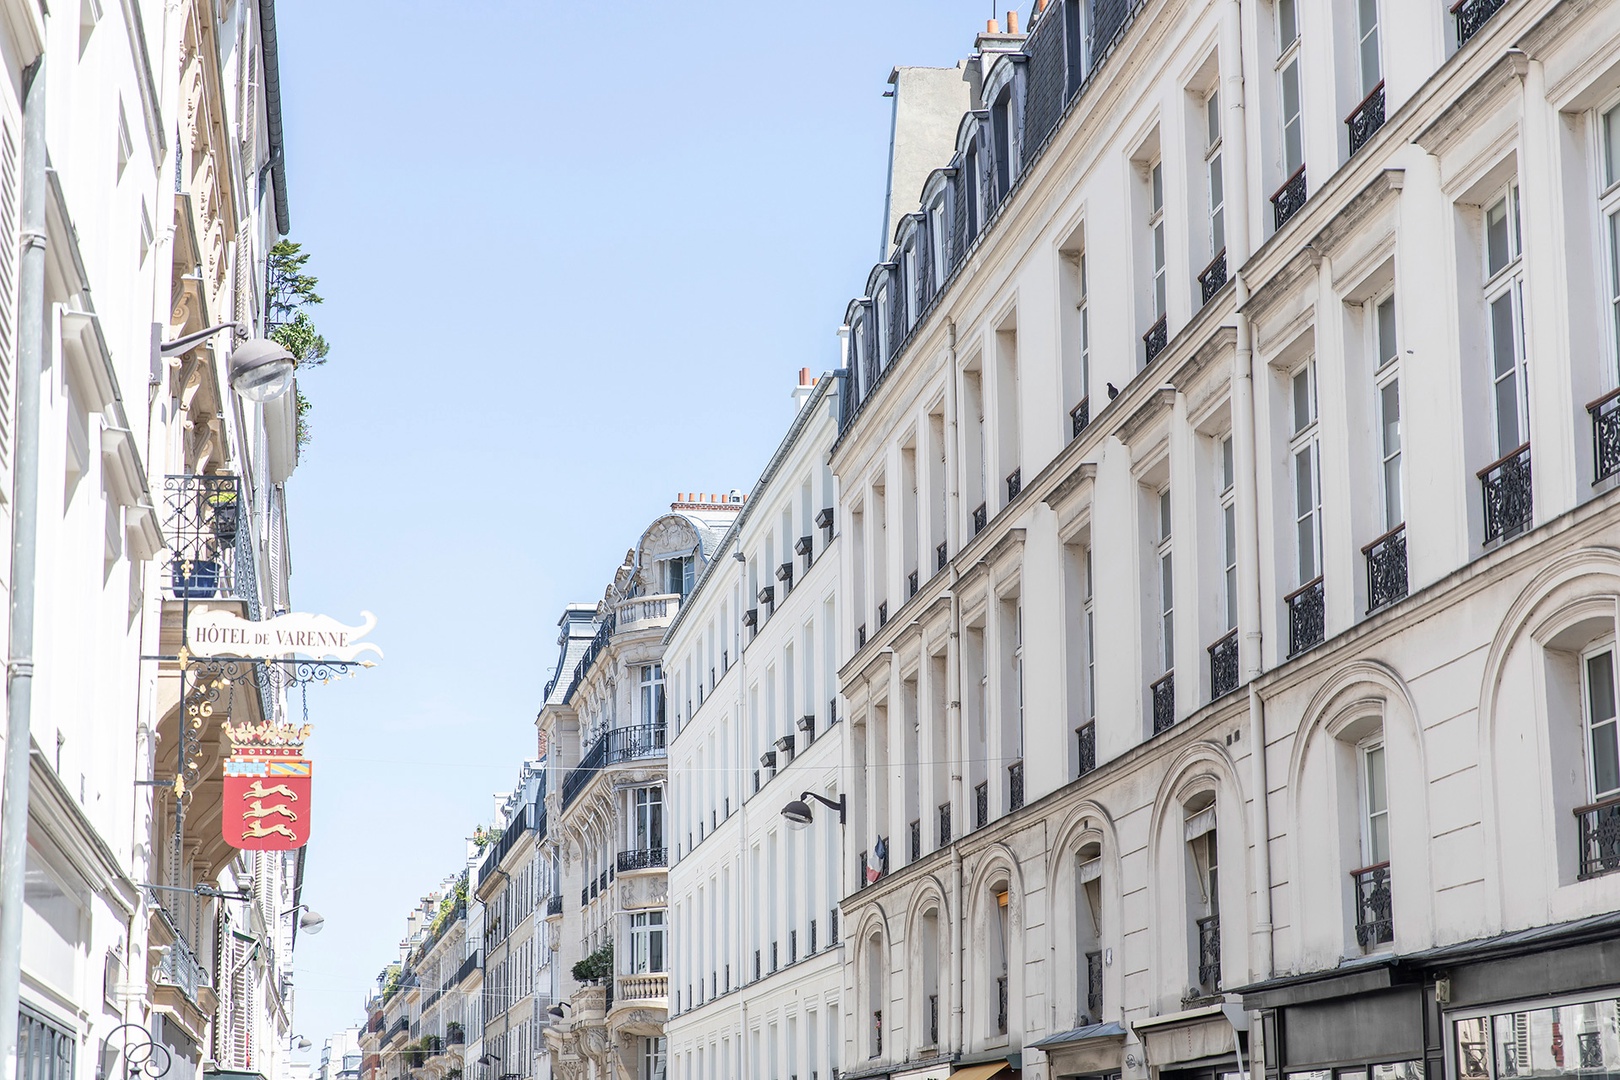 The Montrose is located on a charming street in the 7th arrondissement.